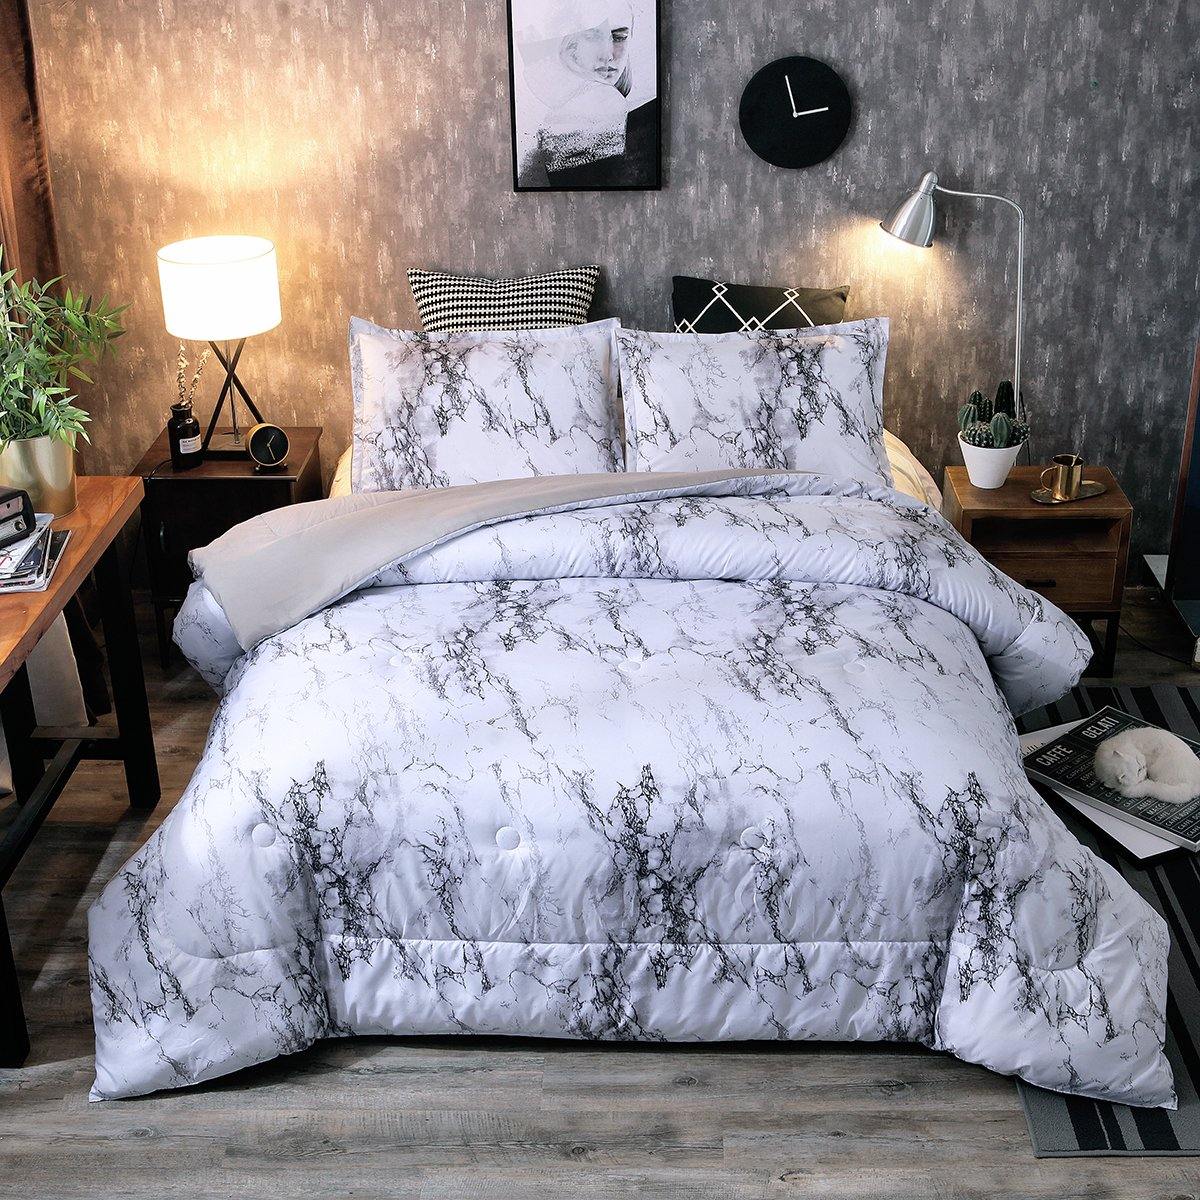 WONGS BEDDING Marbling comforter set bedroom bedding 3 Pieces Bedding Comforter with 2 Pillow Cases suitable for the whole season - Wongs bedding